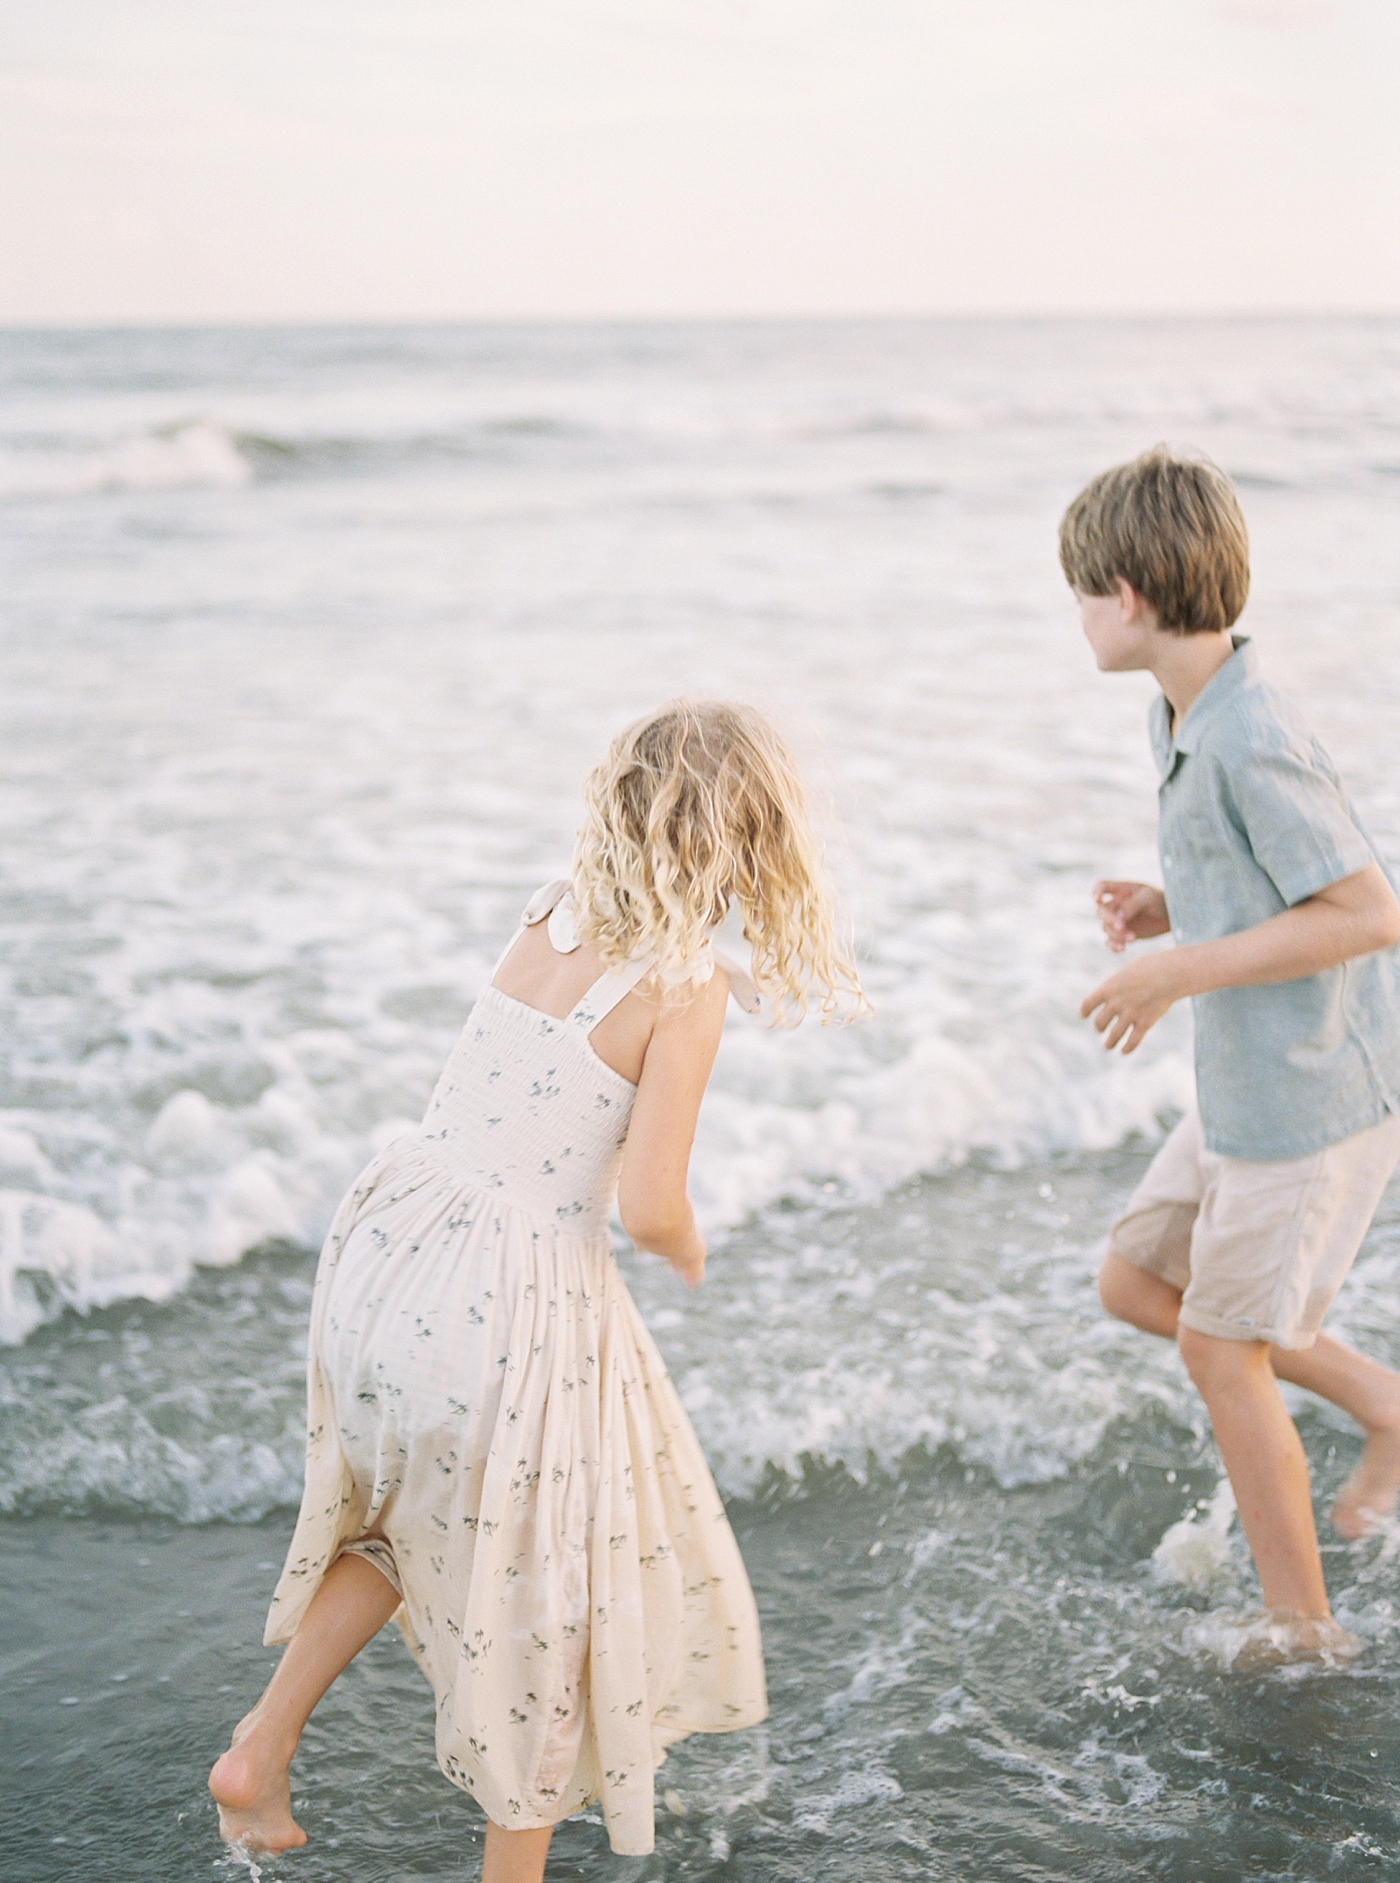 Brother and sister playing in the ocean during their Maternity Session at Folly Beach | Image by Caitlyn Motycka